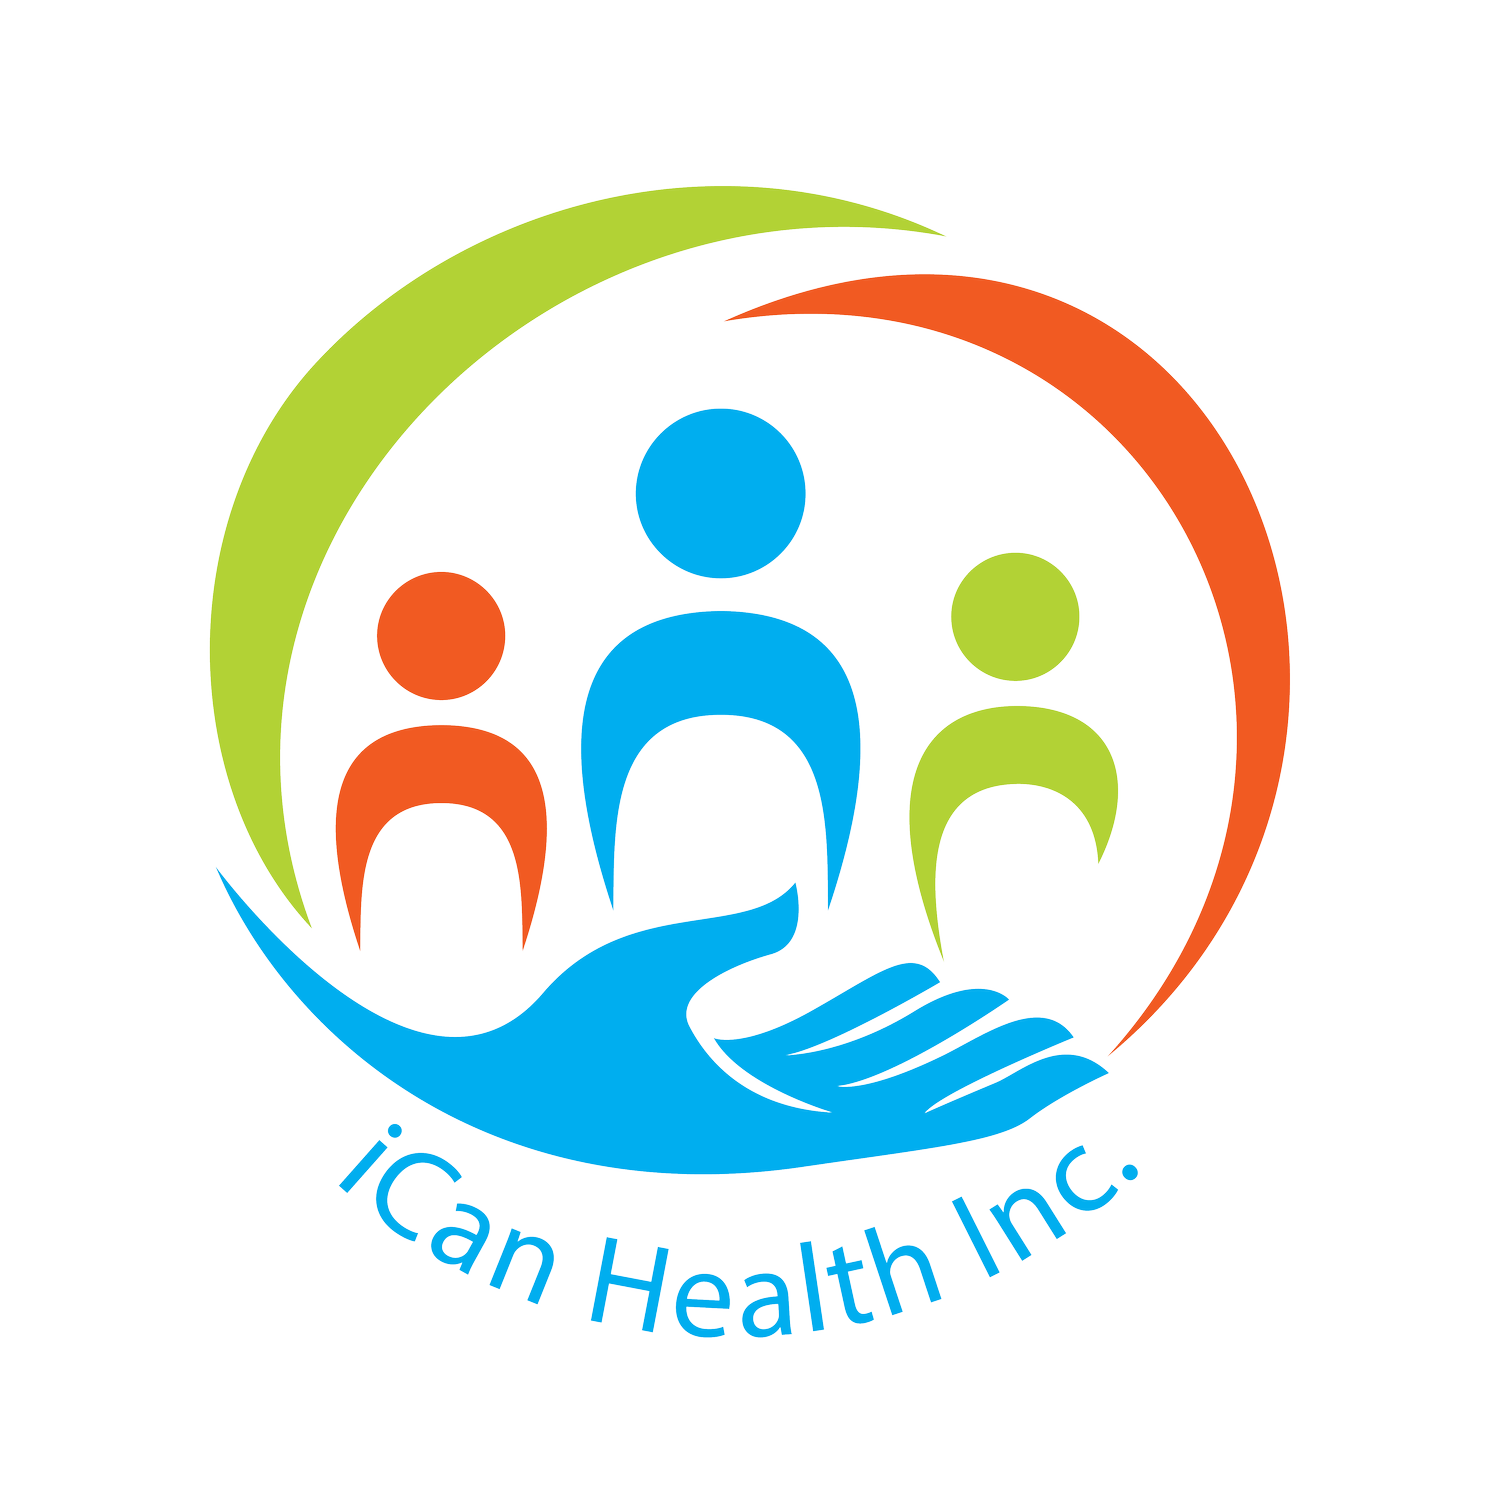 About — iCan Health Inc.